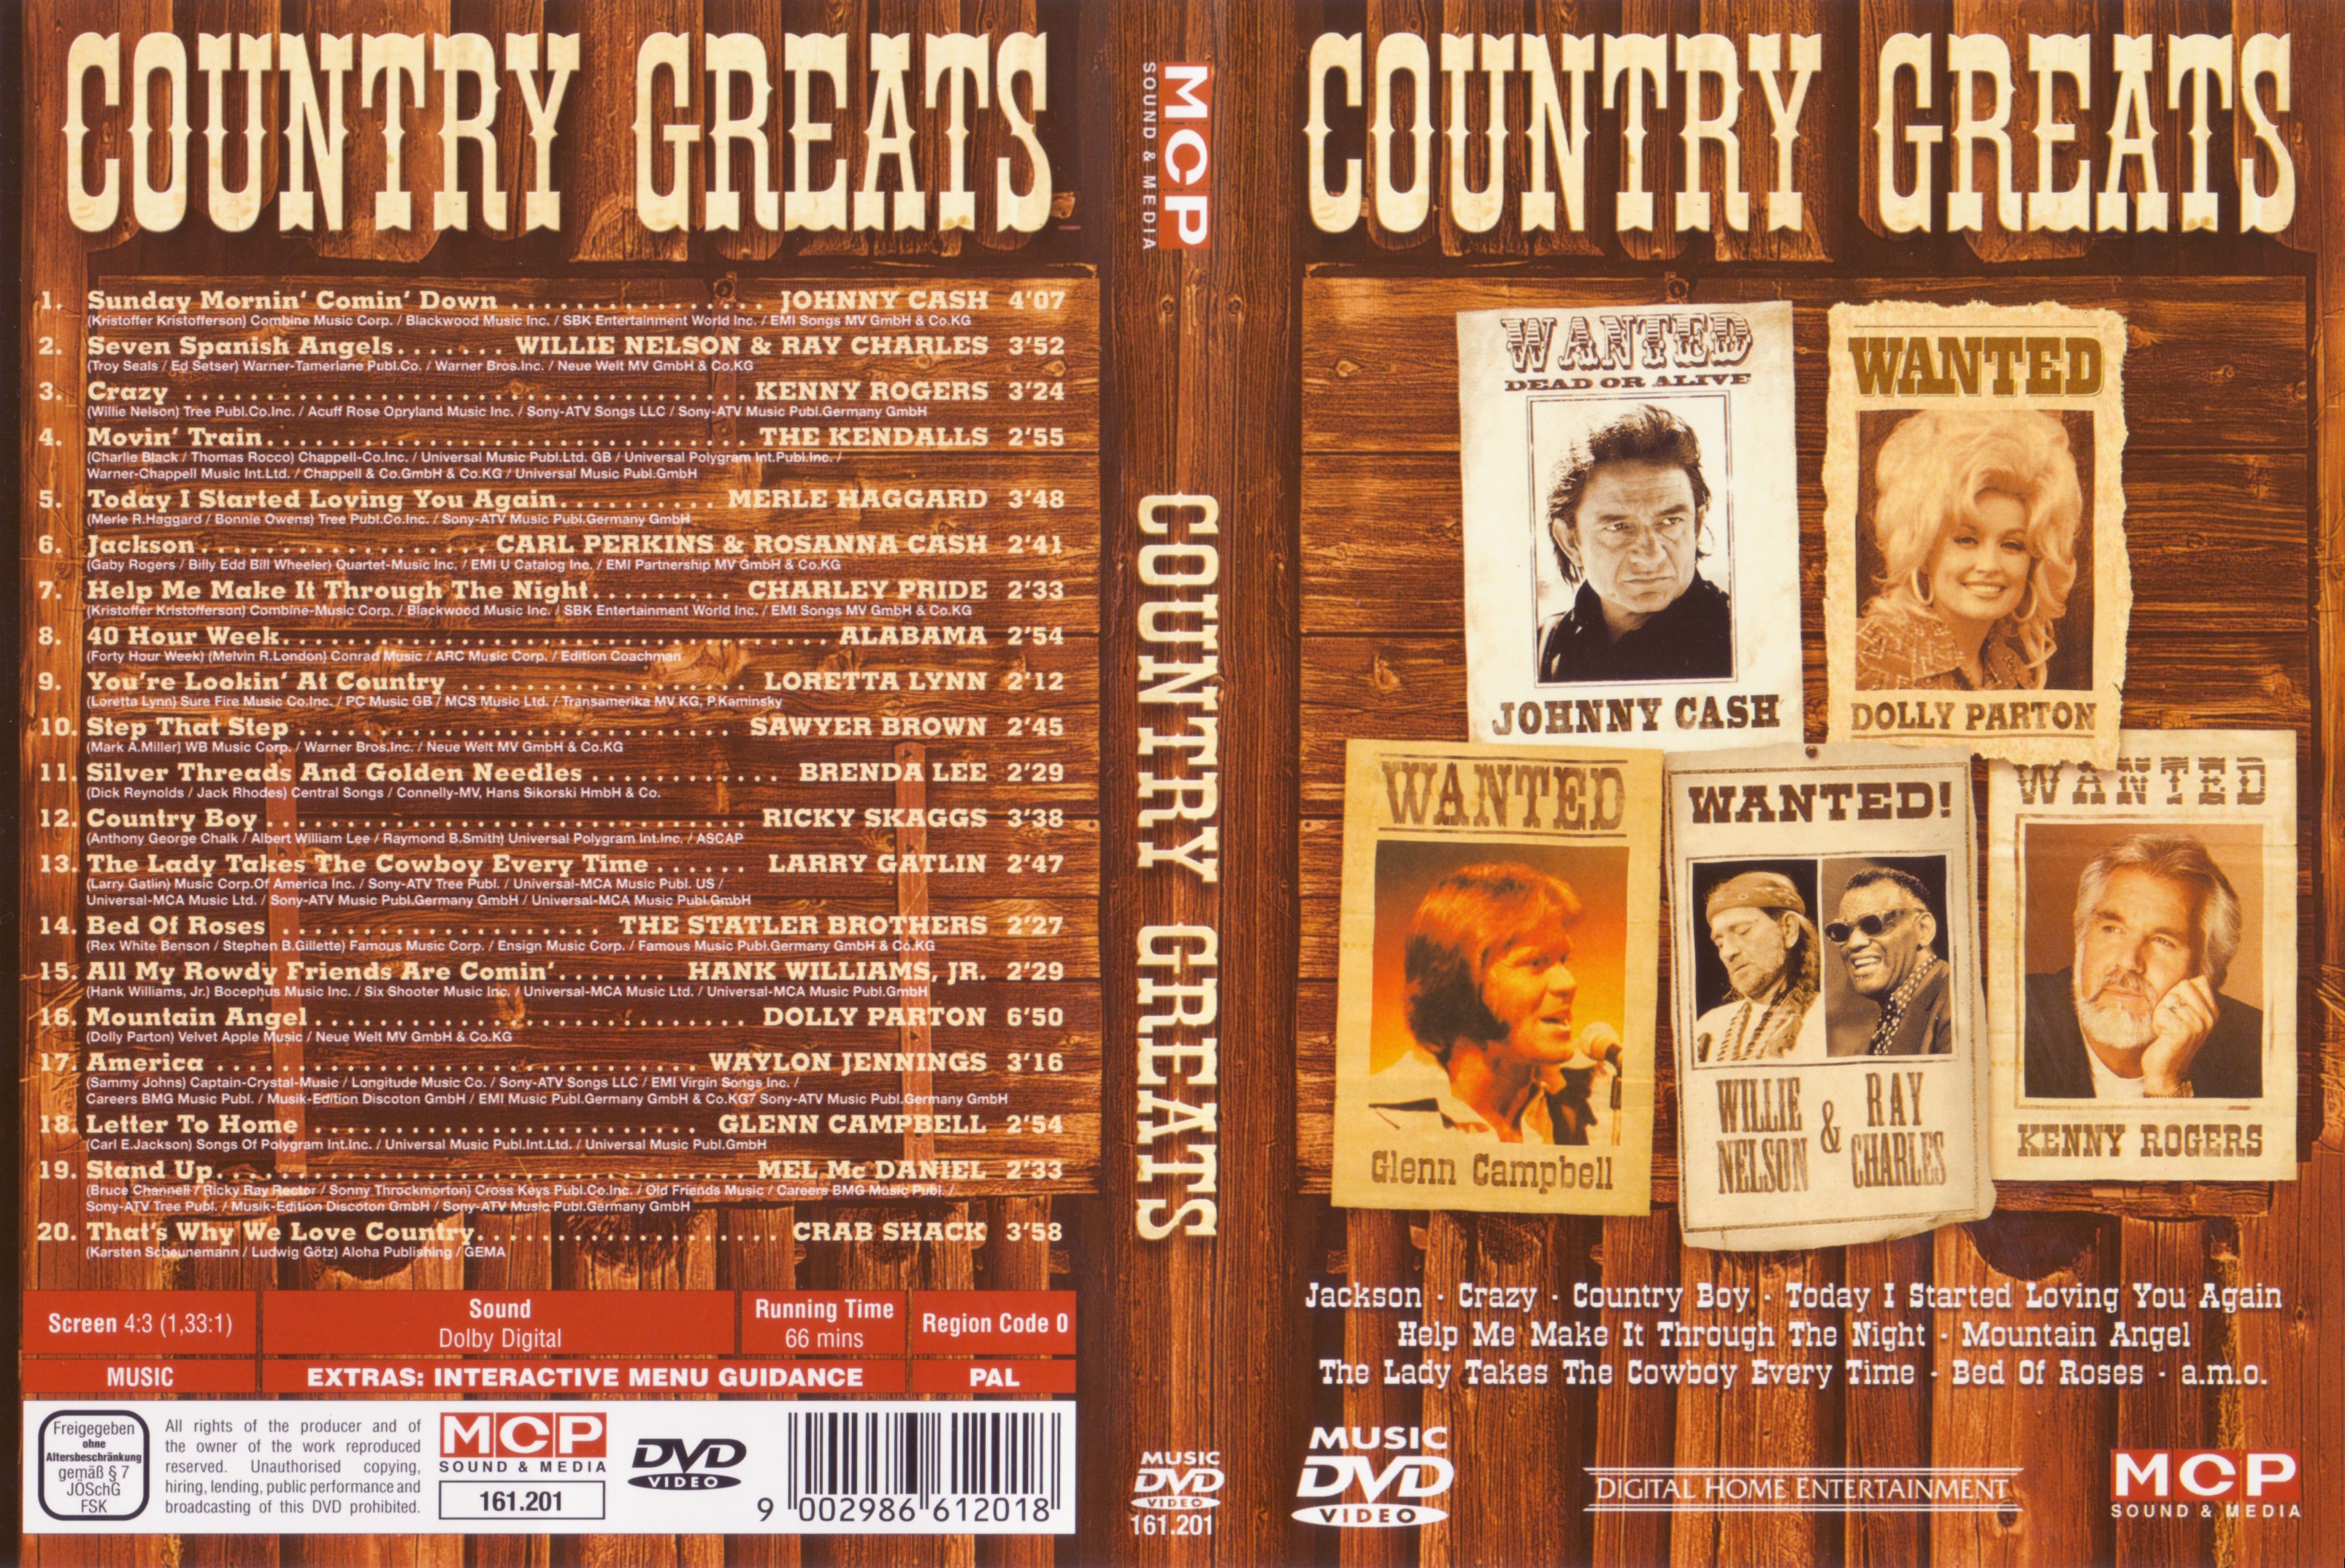 Jaquette DVD Country Greats